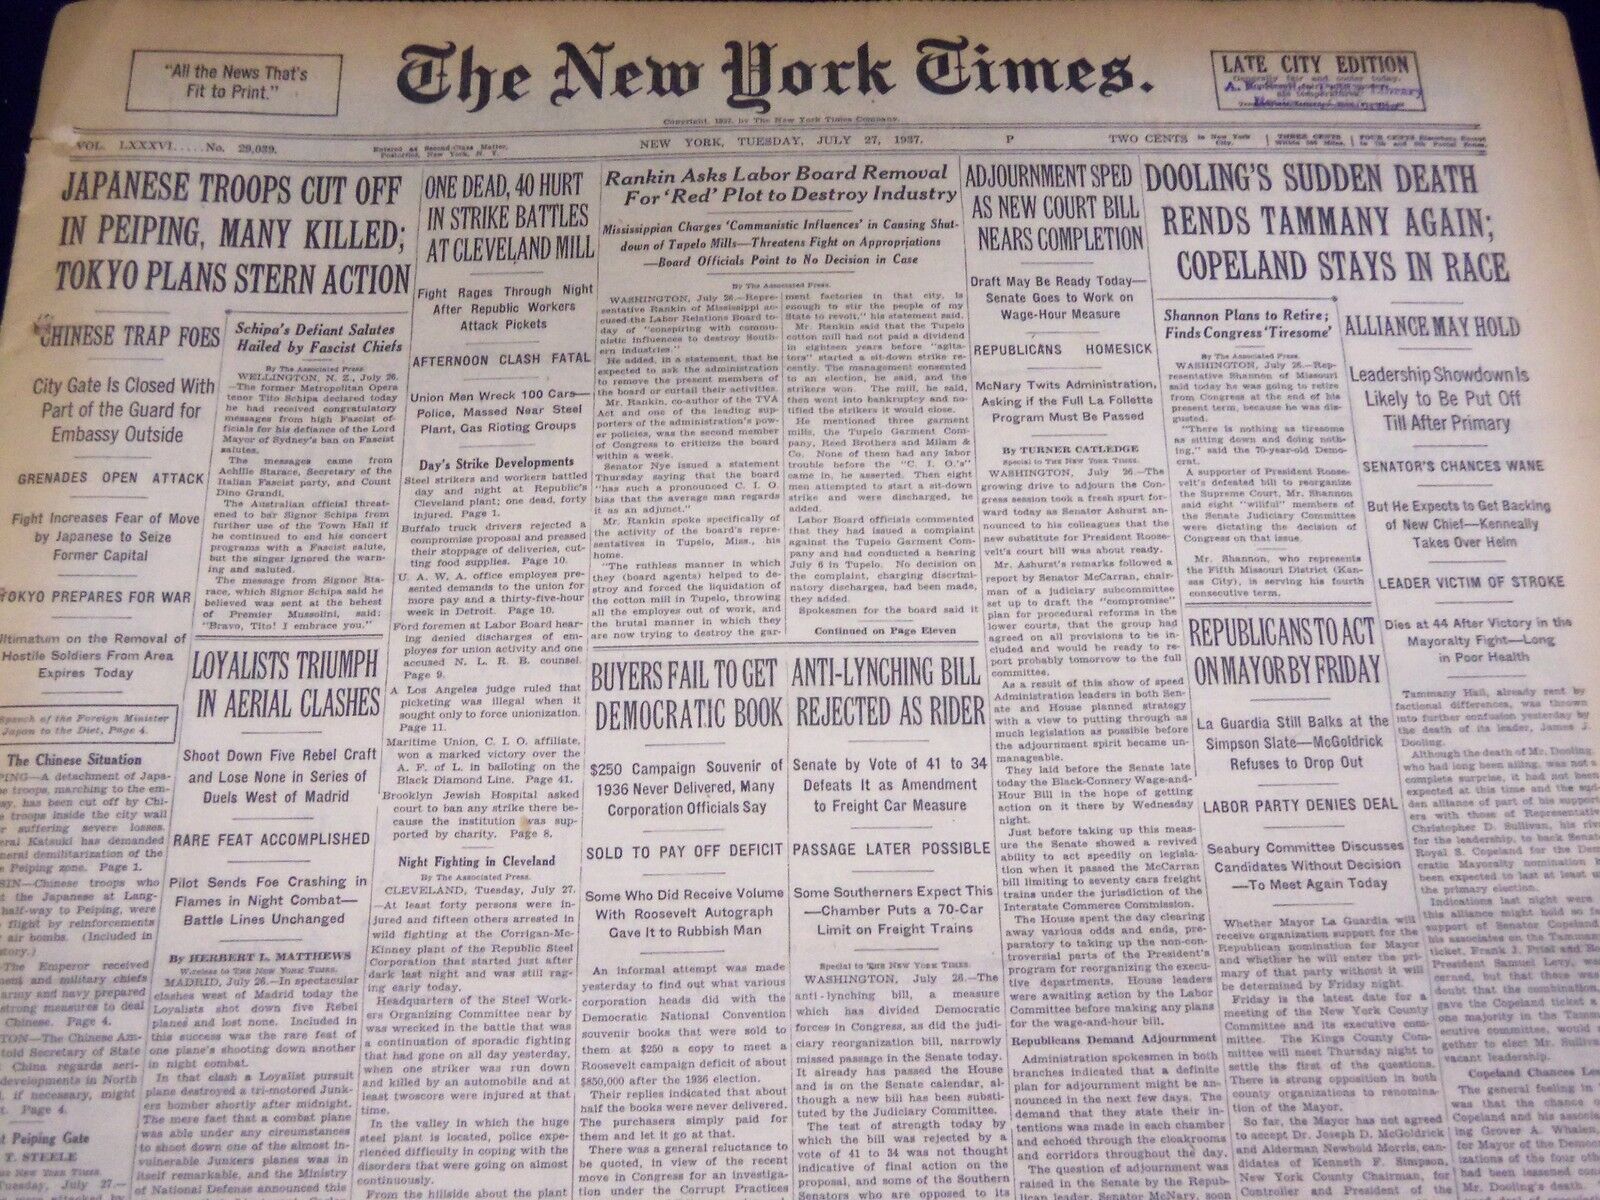 1937 JULY 27 NEW YORK TIMES - TAMMANY LEADER DOOLING DEAD AT 44 - NT 3441